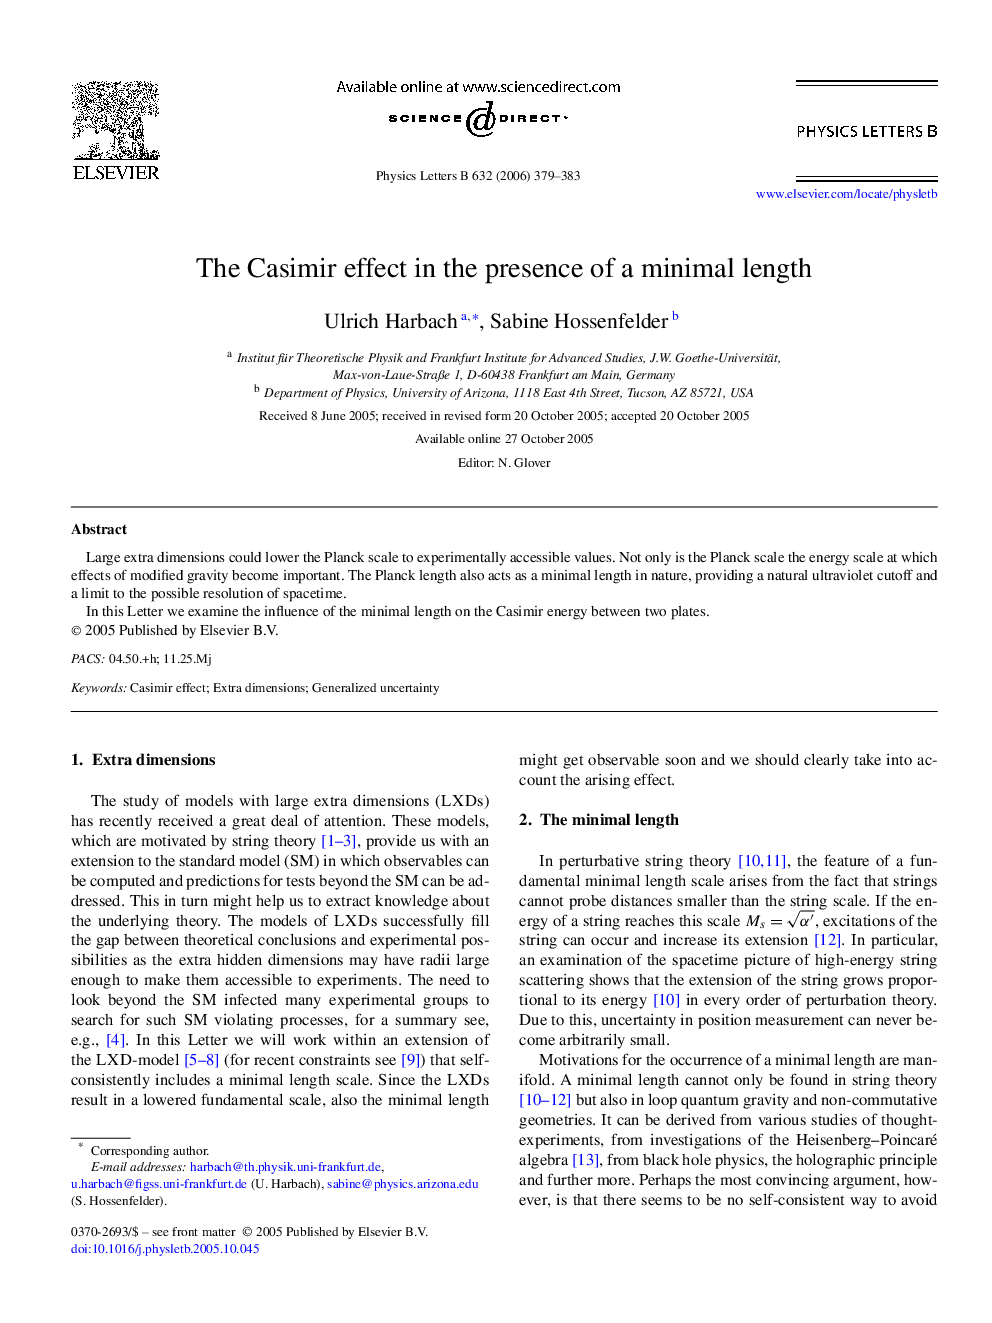 The Casimir effect in the presence of a minimal length